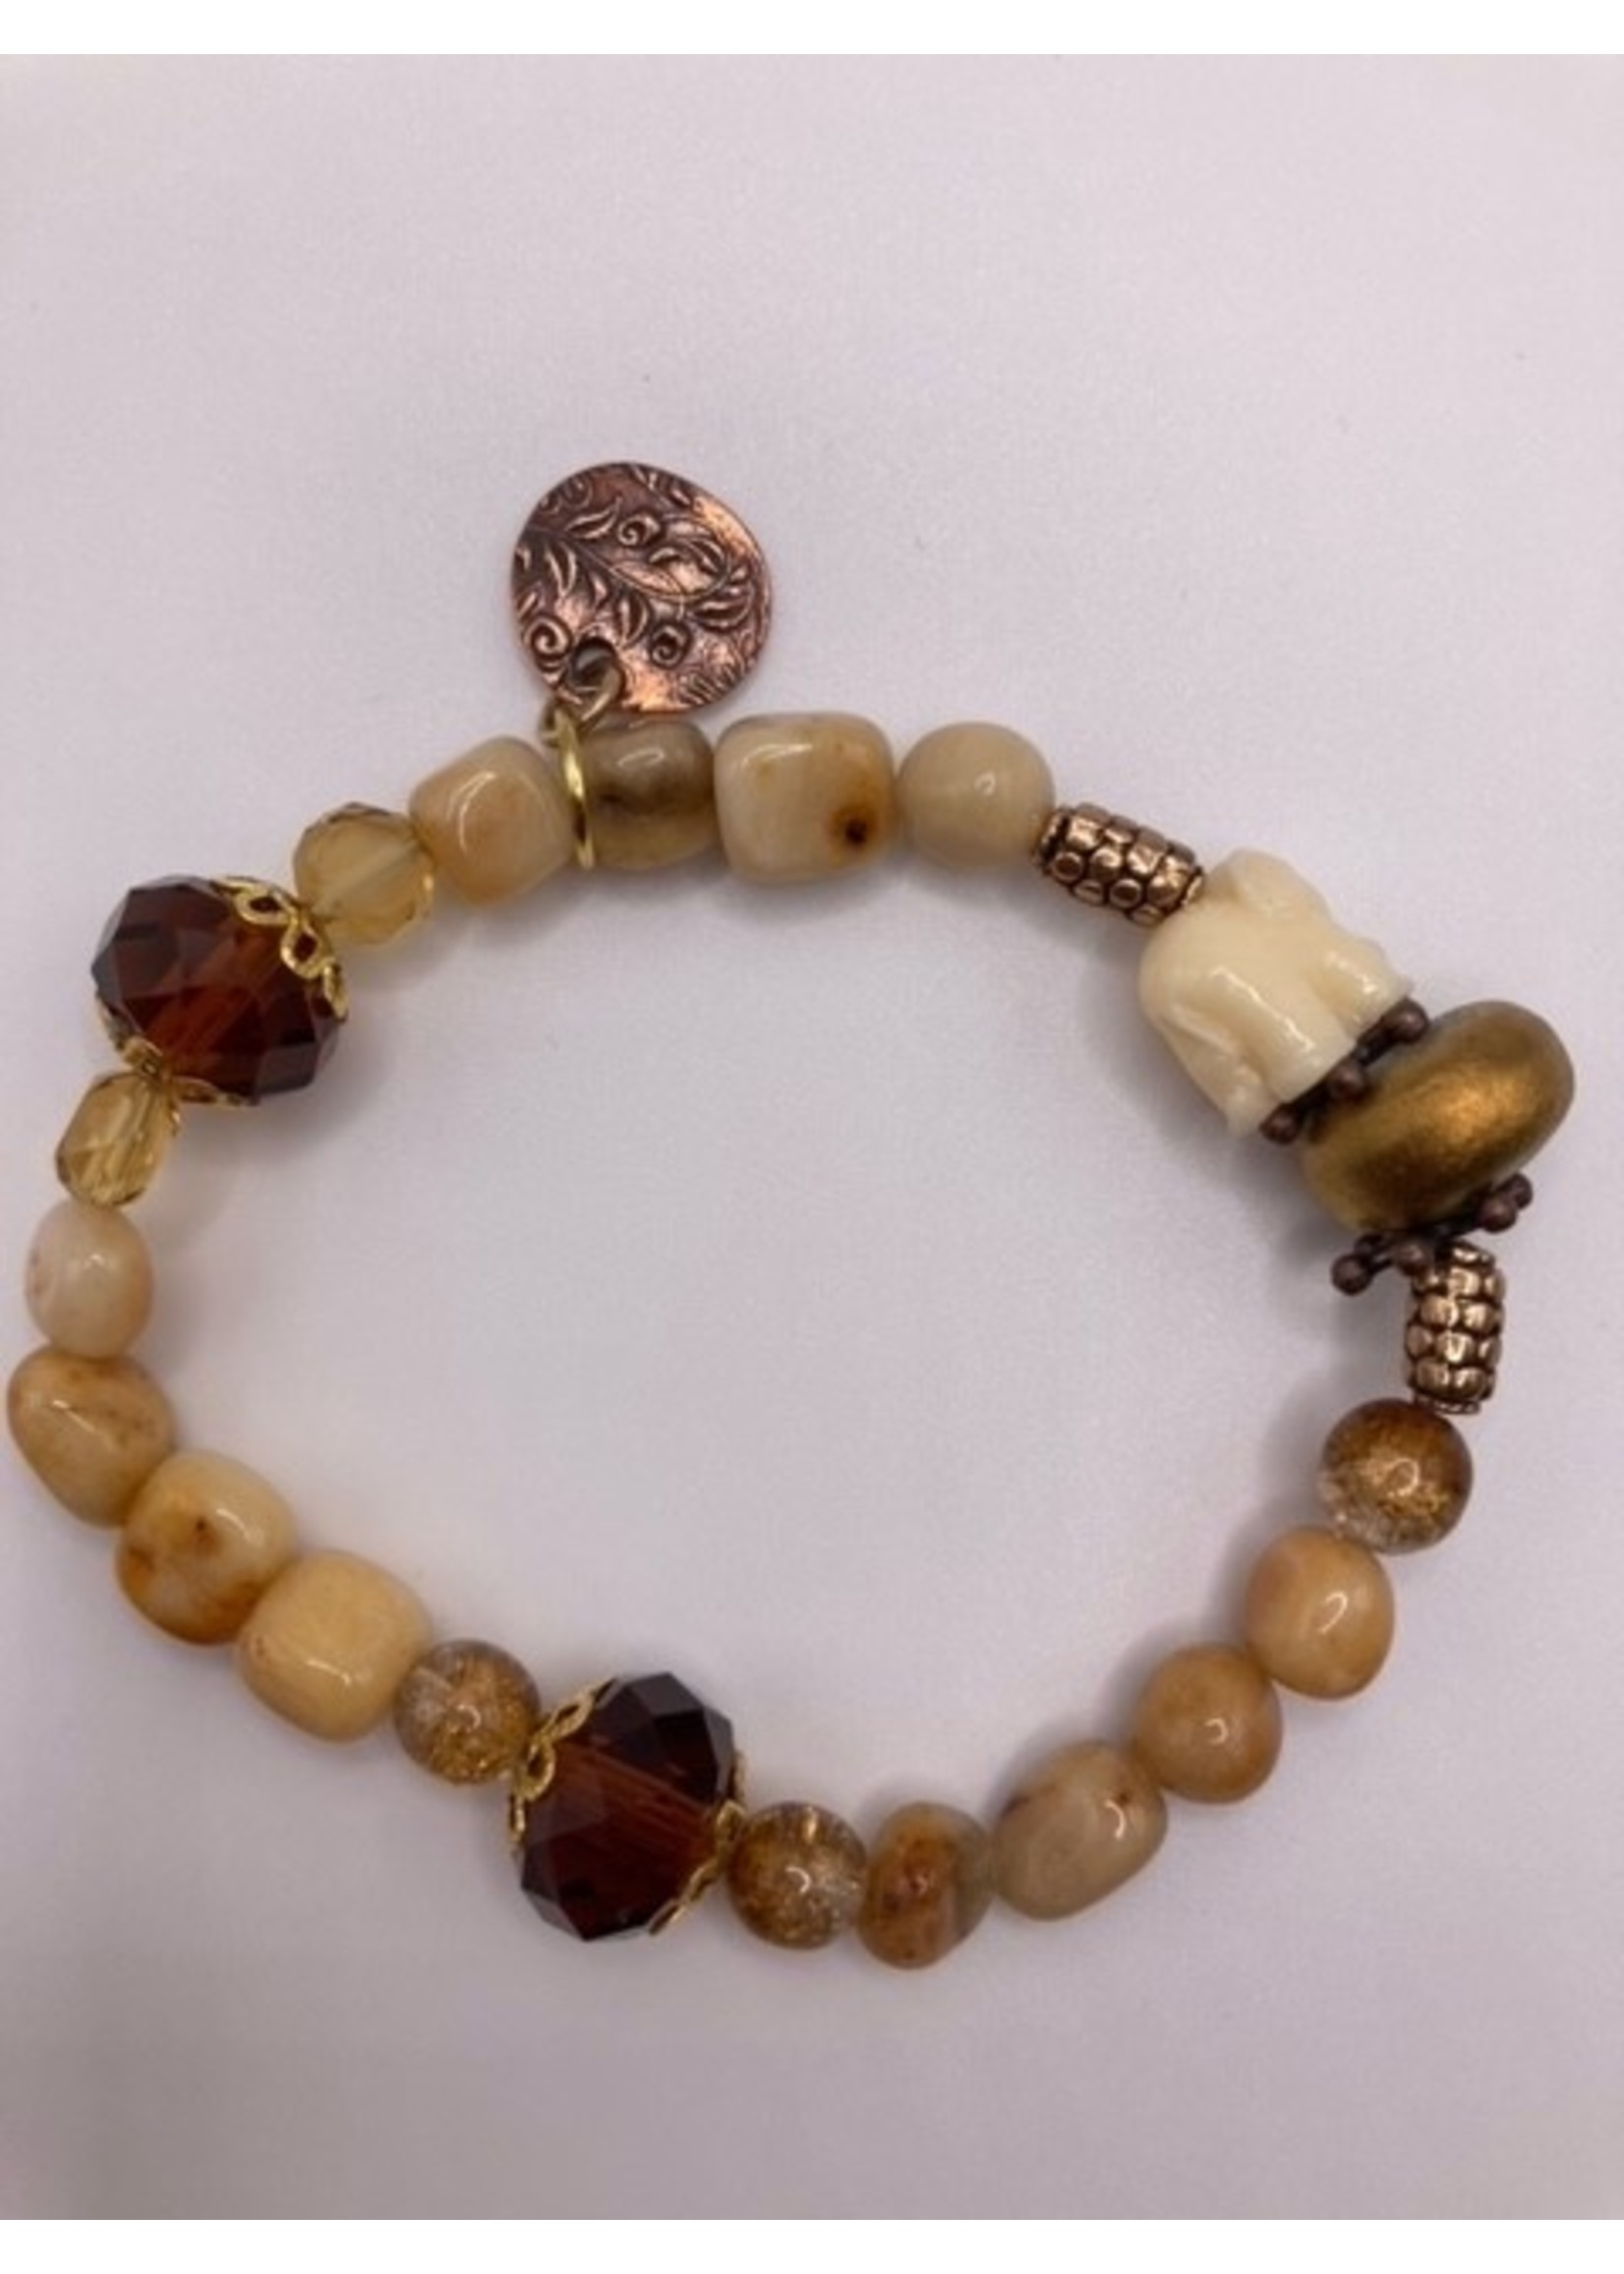 Our Twisted Dahlia Agate and Glass Beads Stretch Bracelet